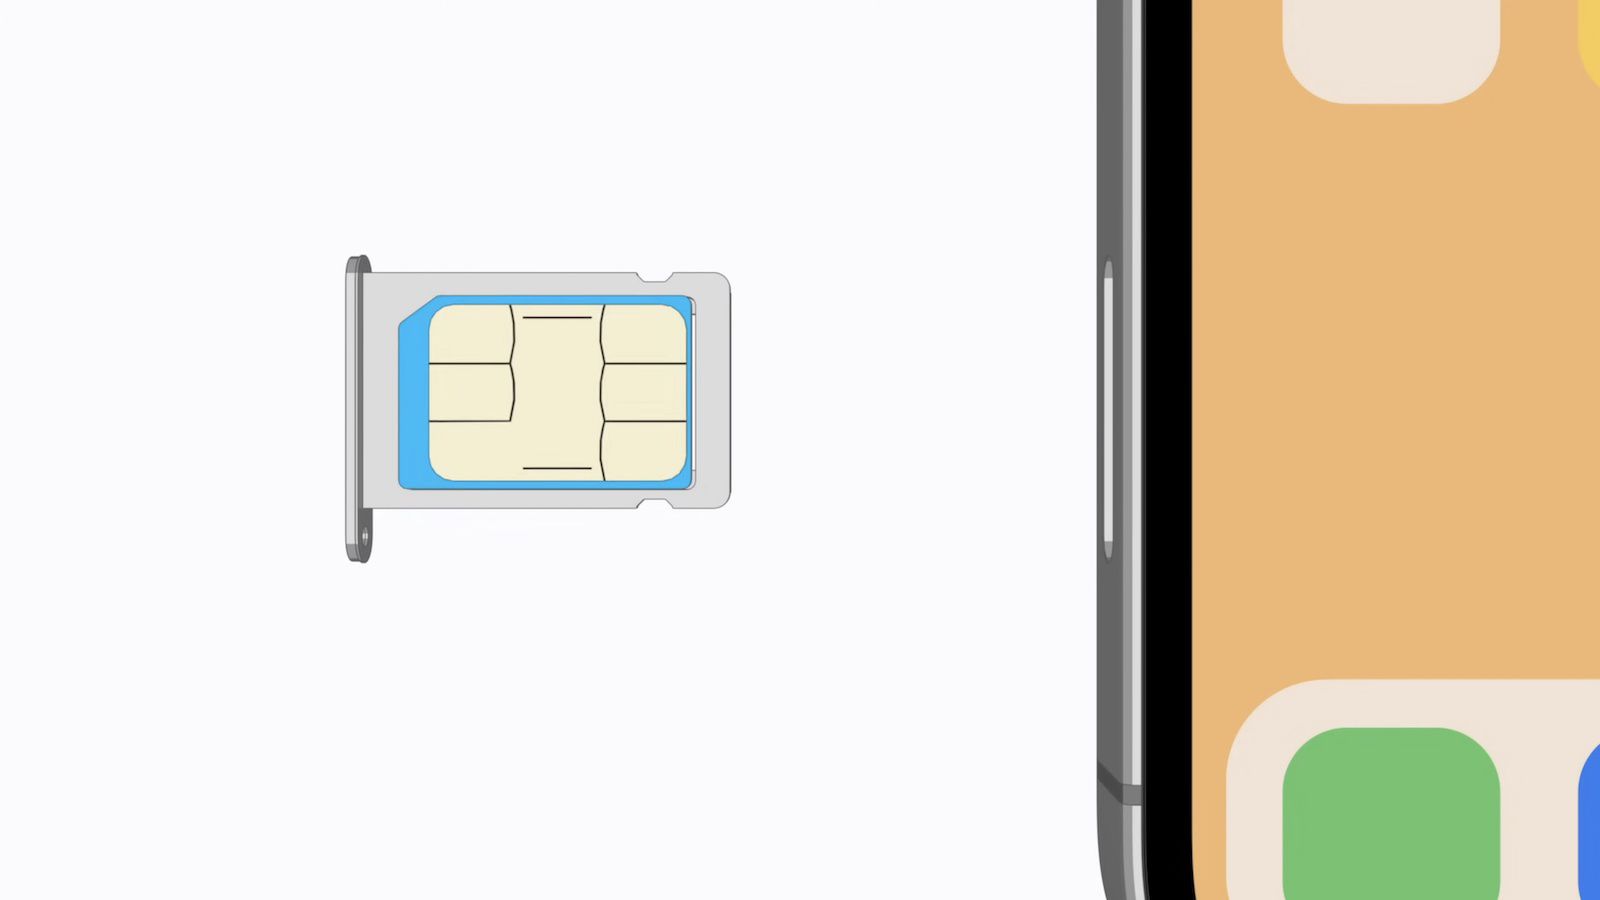 Apple Has Considered Removing SIM Card Slot From Some iPhone 14 Models - MacRumors